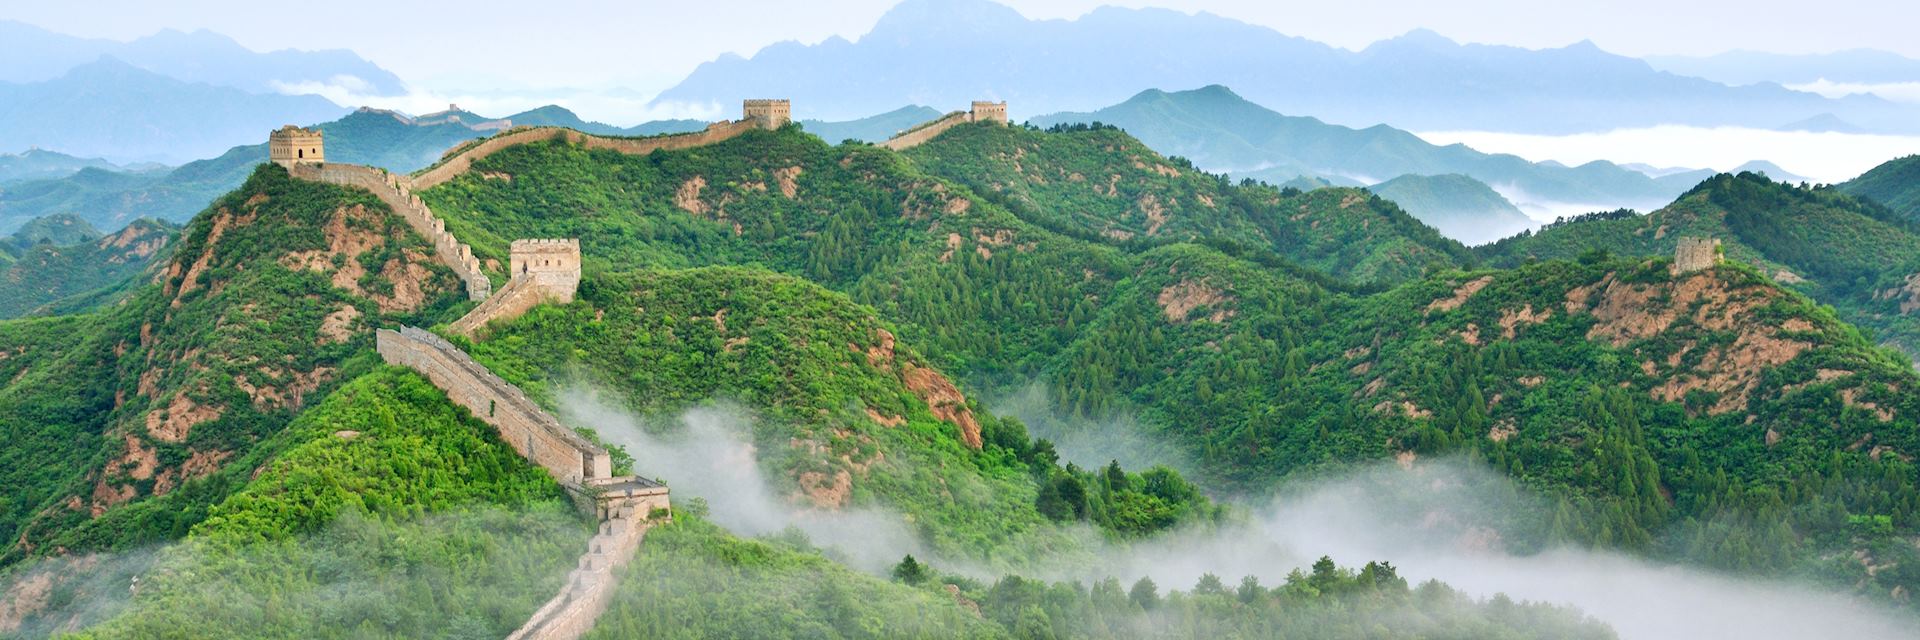 Mist at the Great Wall of China